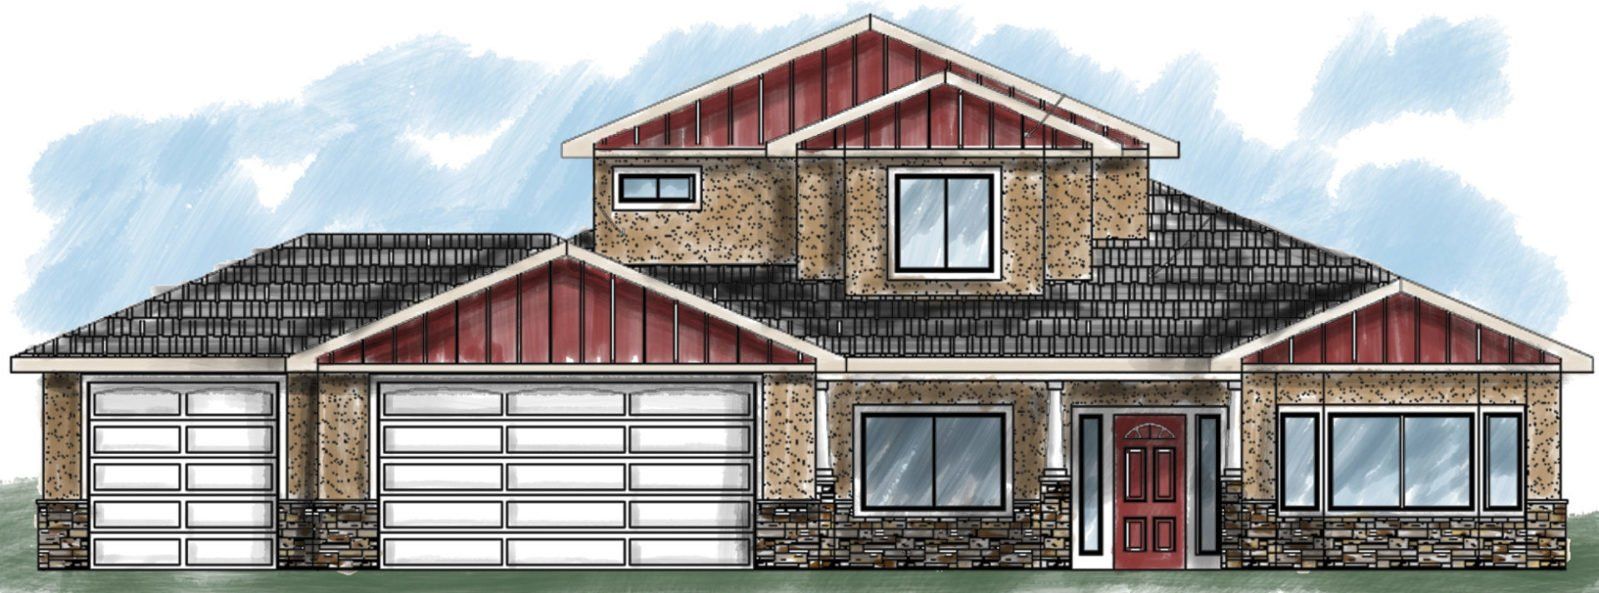 The Coral Front Exterior Elevation | Integrity Homes | Grand Junction, CO 81501